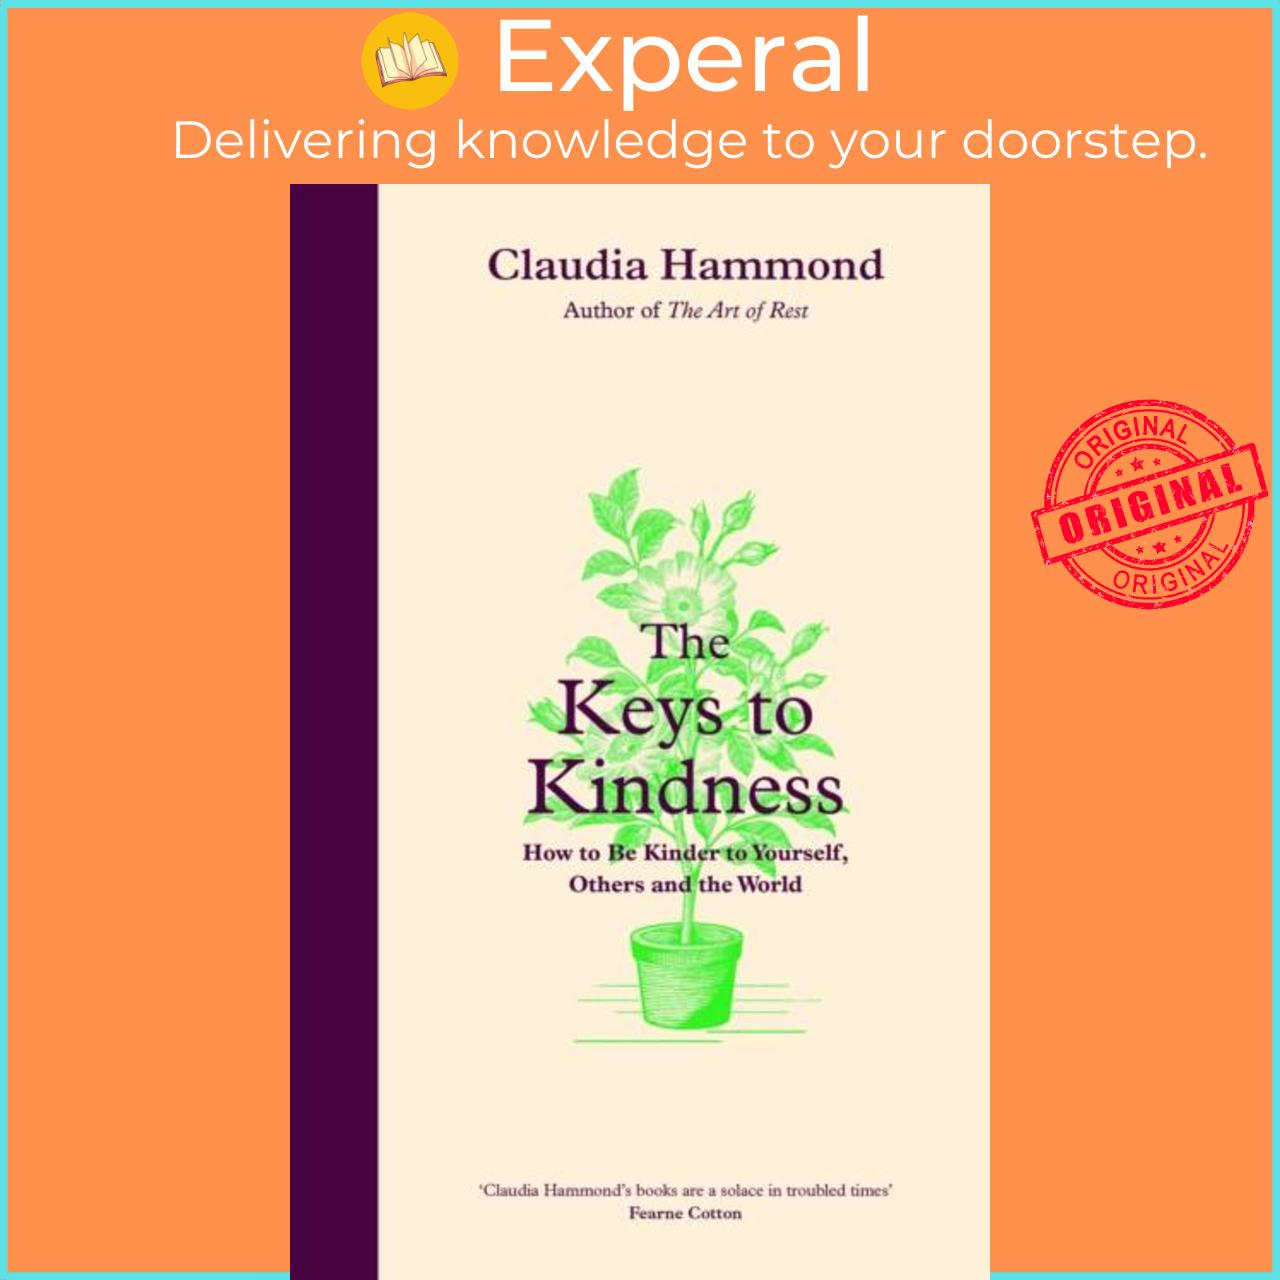 Sách - The Keys to Kindness - How to be Kinder to Yourself, Others and the Wo by Claudia Hammond (UK edition, hardcover)